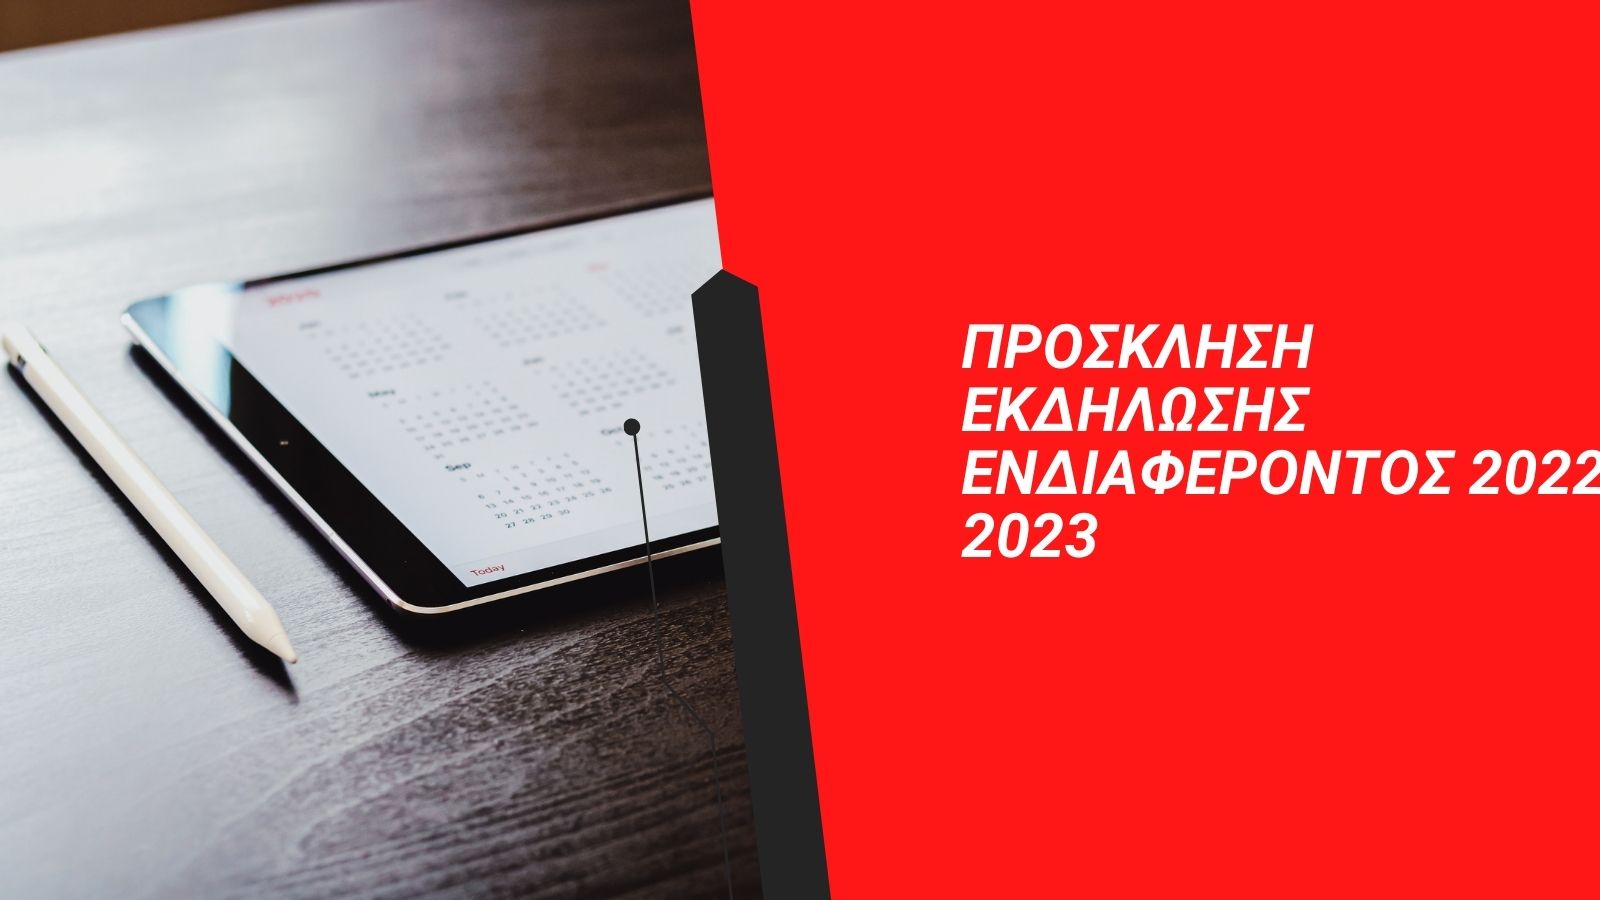 Read more about the article Πρόσκληση Εκδήλωσης Ενδιαφέροντος  2022-2023